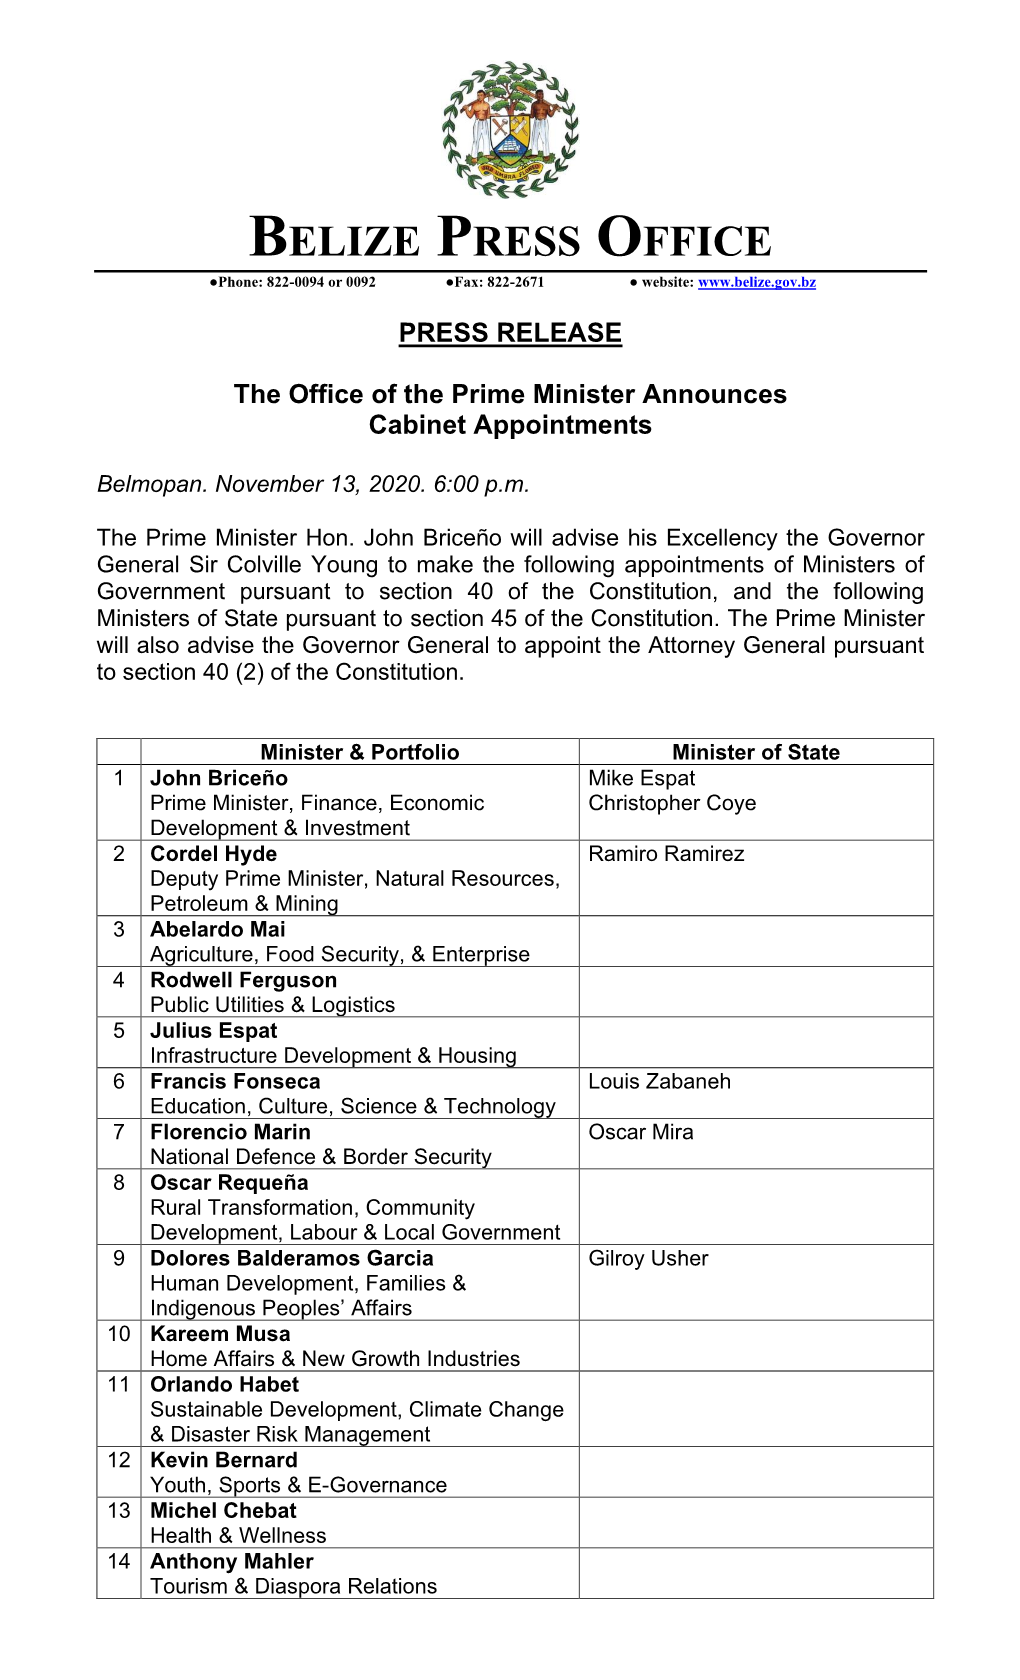 PRESS RELEASE the Office of the Prime Minister Announces Cabinet